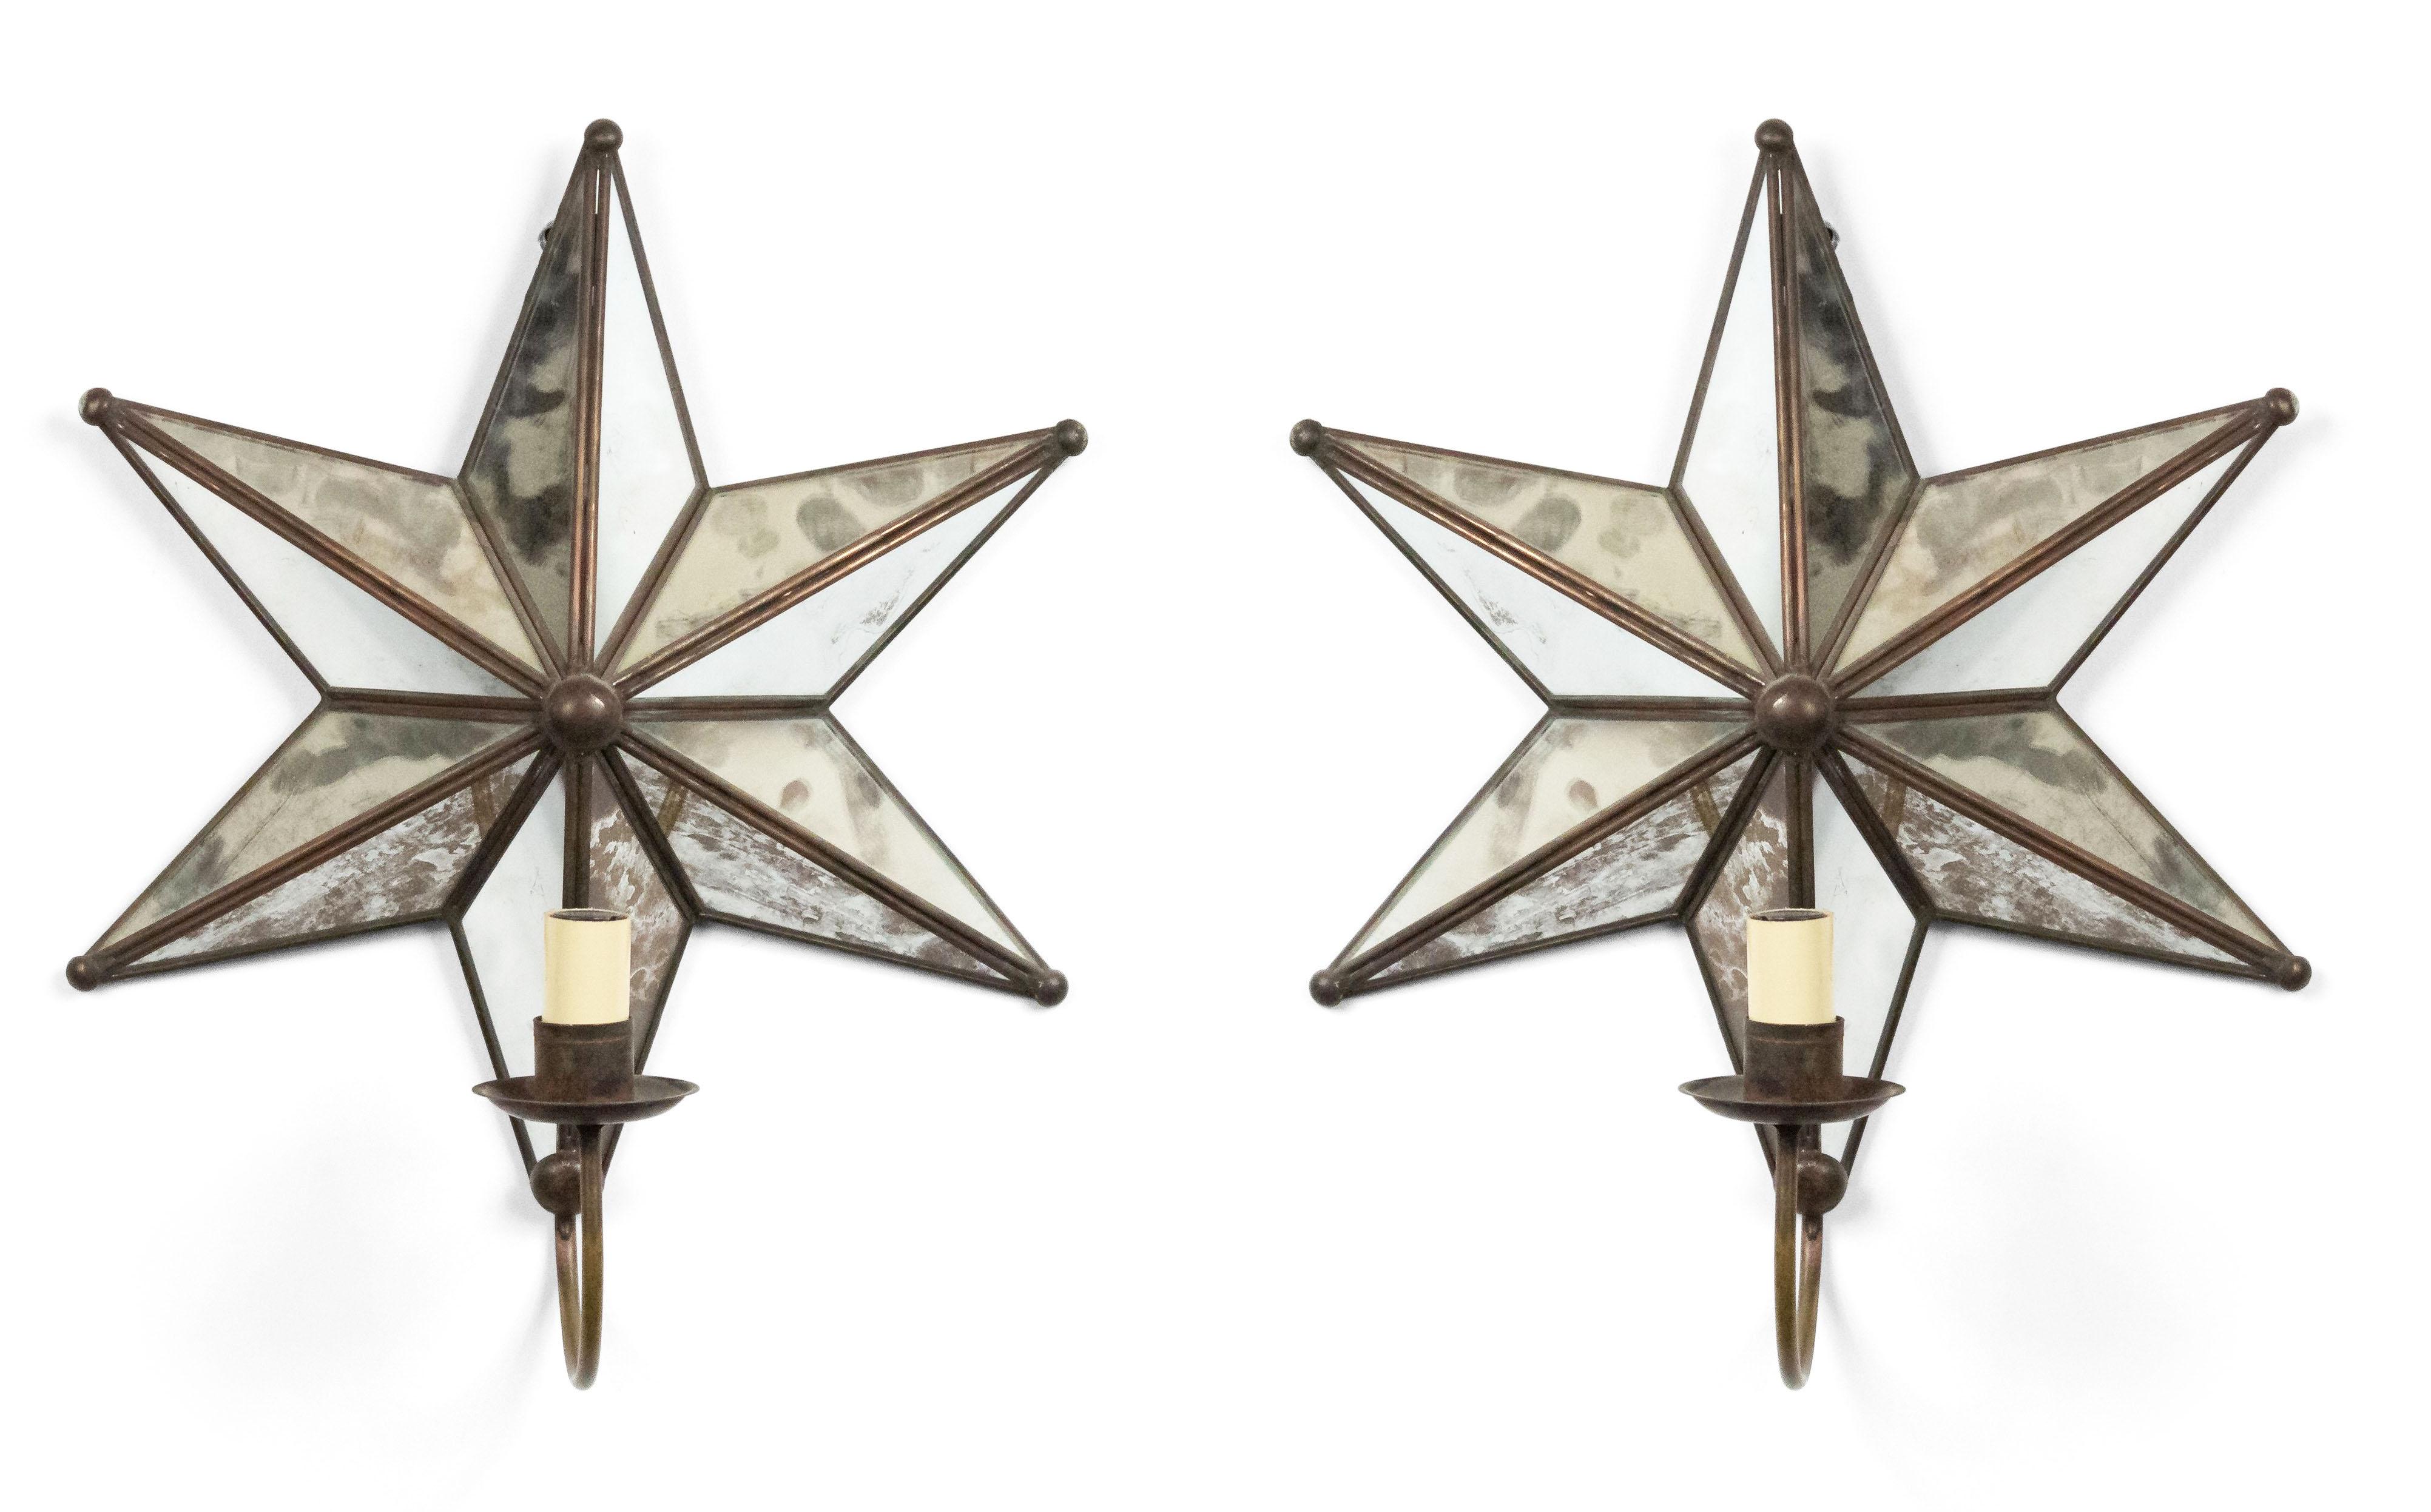 20th Century Pair of American Art Moderne Mirrored Star Wall Sconces